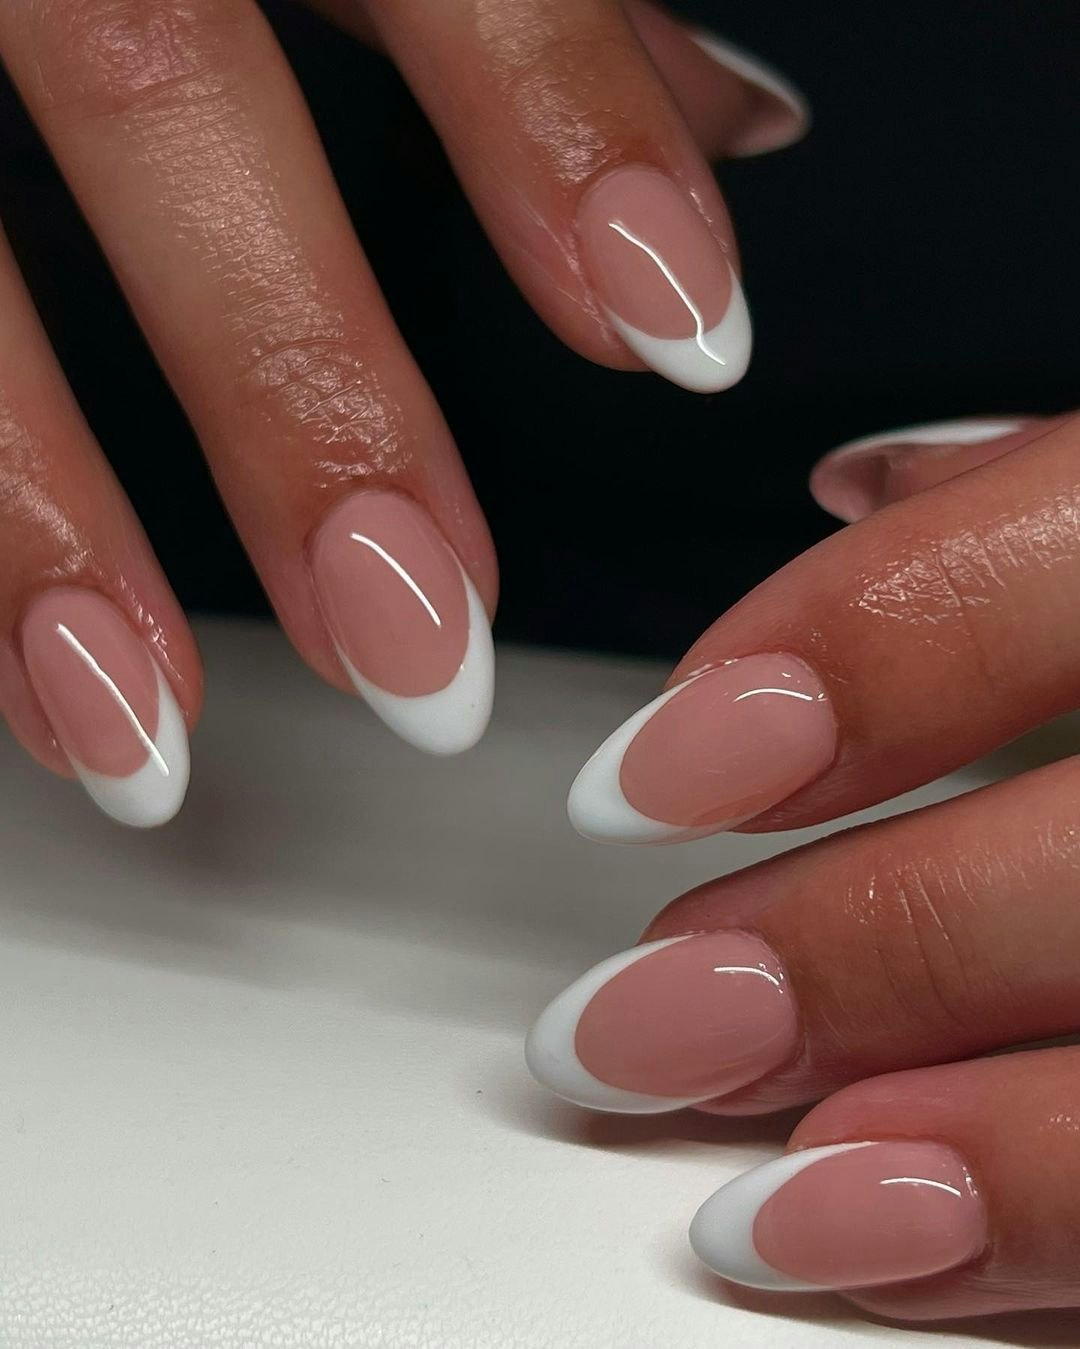 15 Mismatched French Manicure Ideas for Every Style